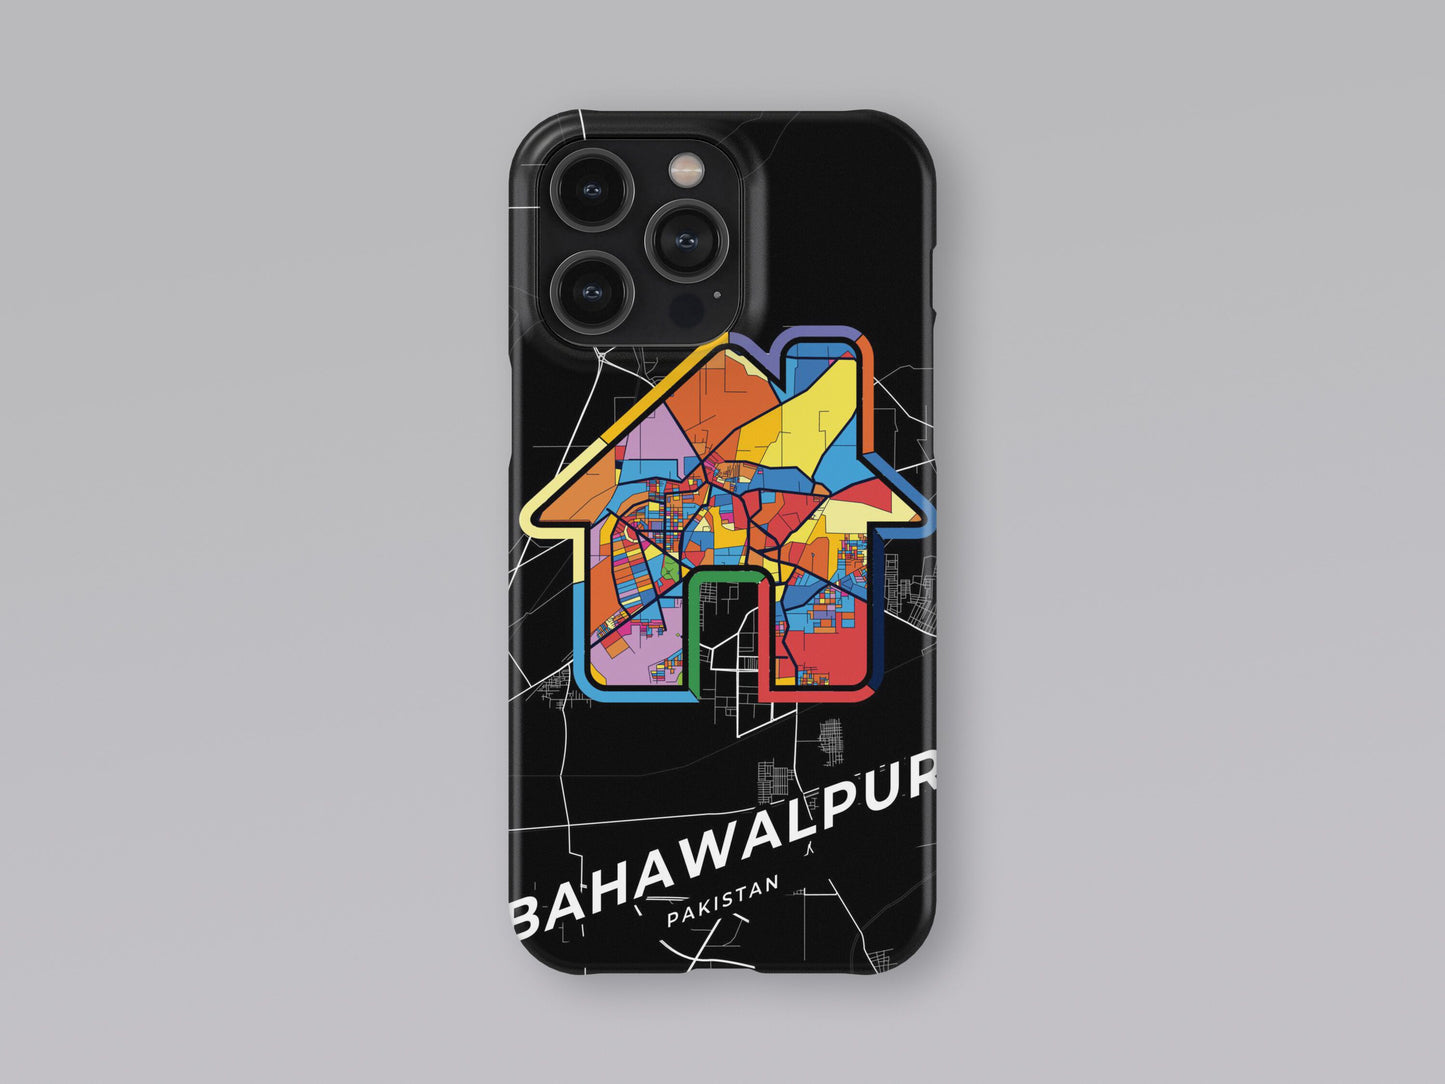 Bahawalpur Pakistan slim phone case with colorful icon. Birthday, wedding or housewarming gift. Couple match cases. 3